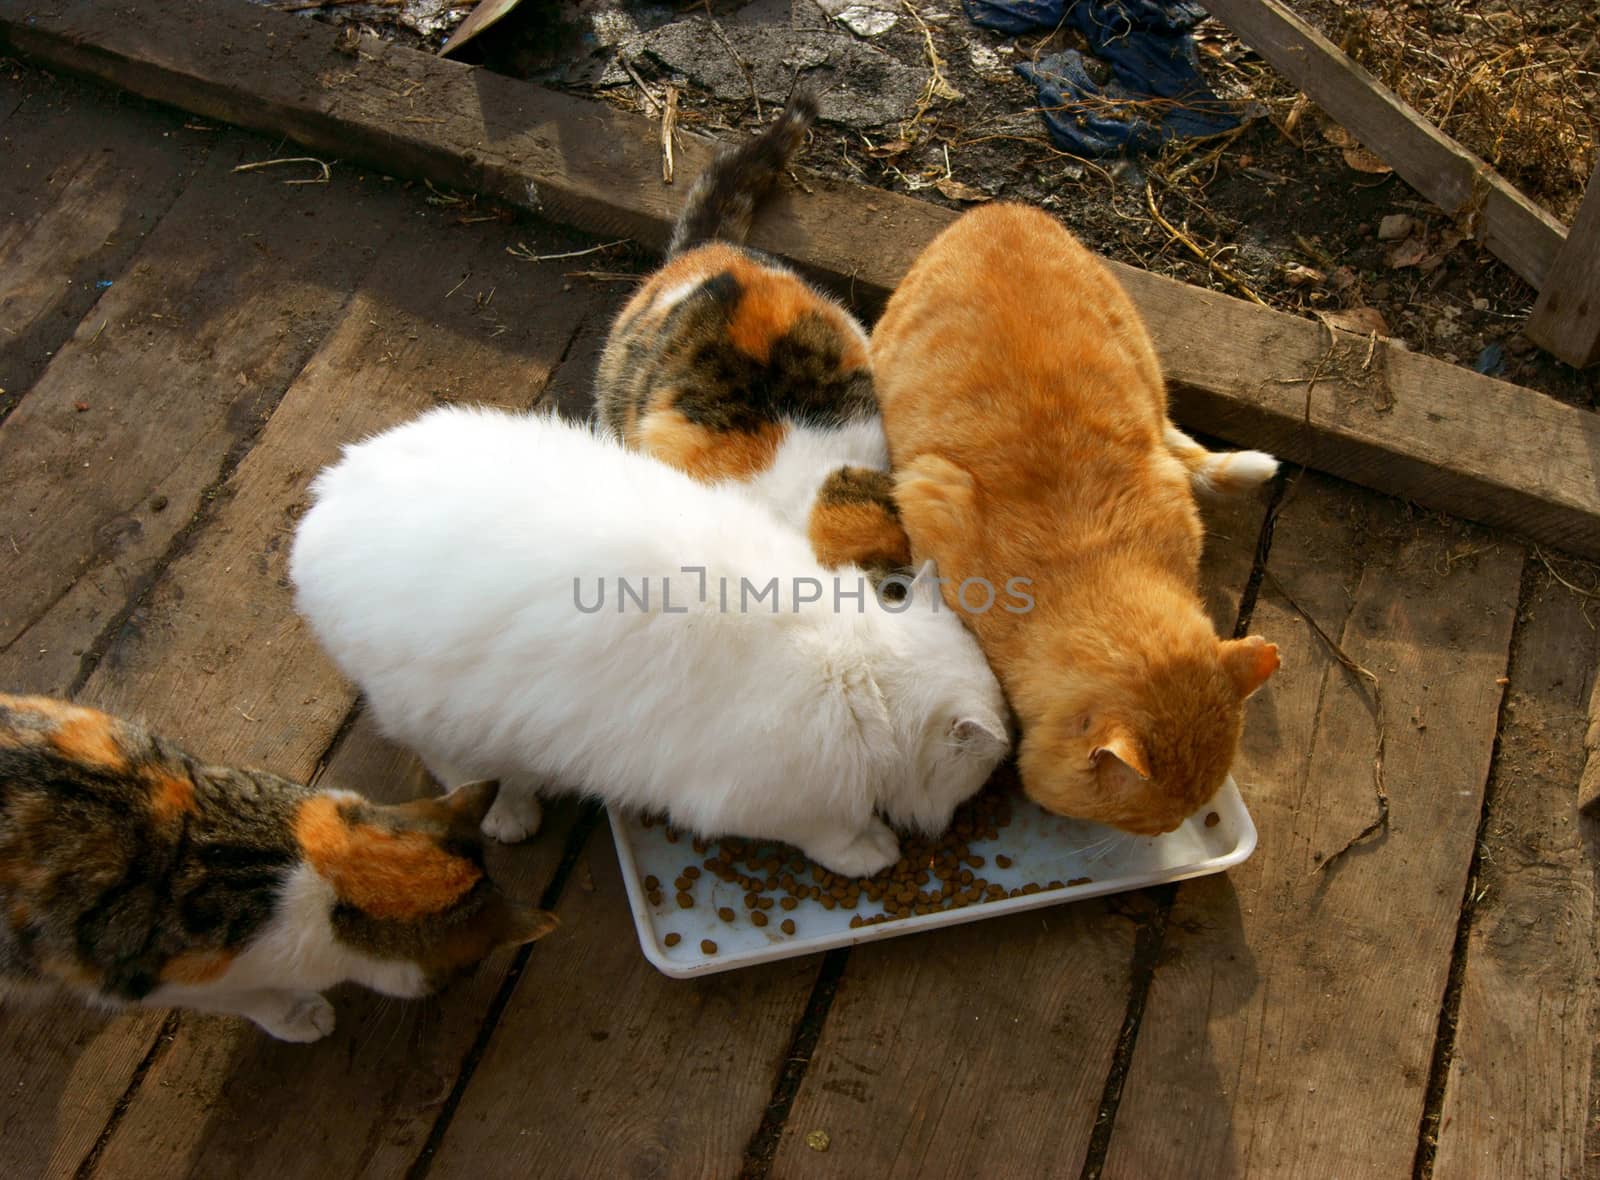 Much cats in courtyard eat from tureen